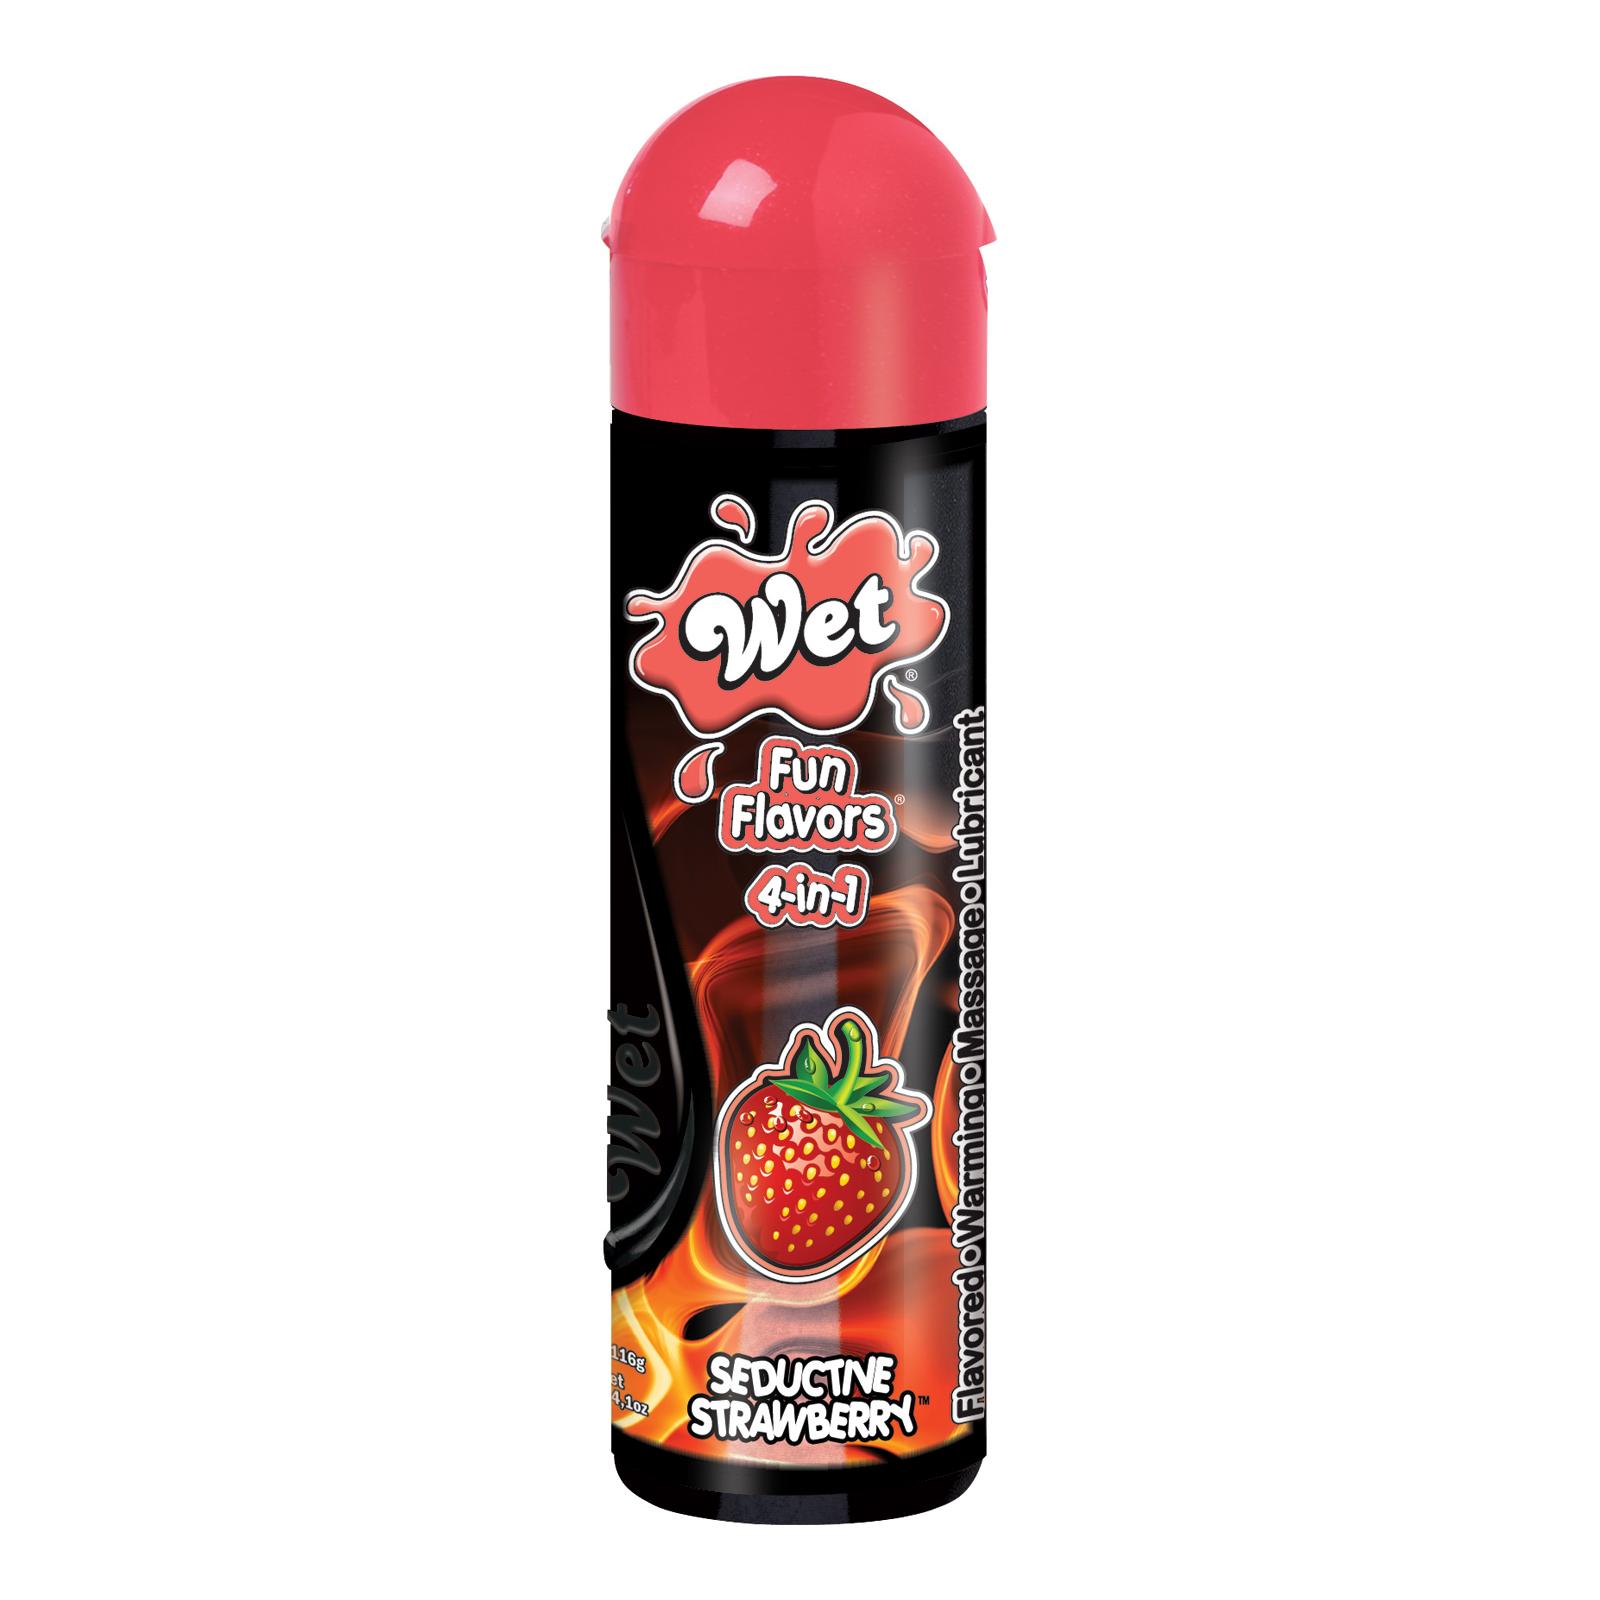 Wet Fun Flavors 4 In 1 Lubricant Seductive Strawberry 4.1 Ounces